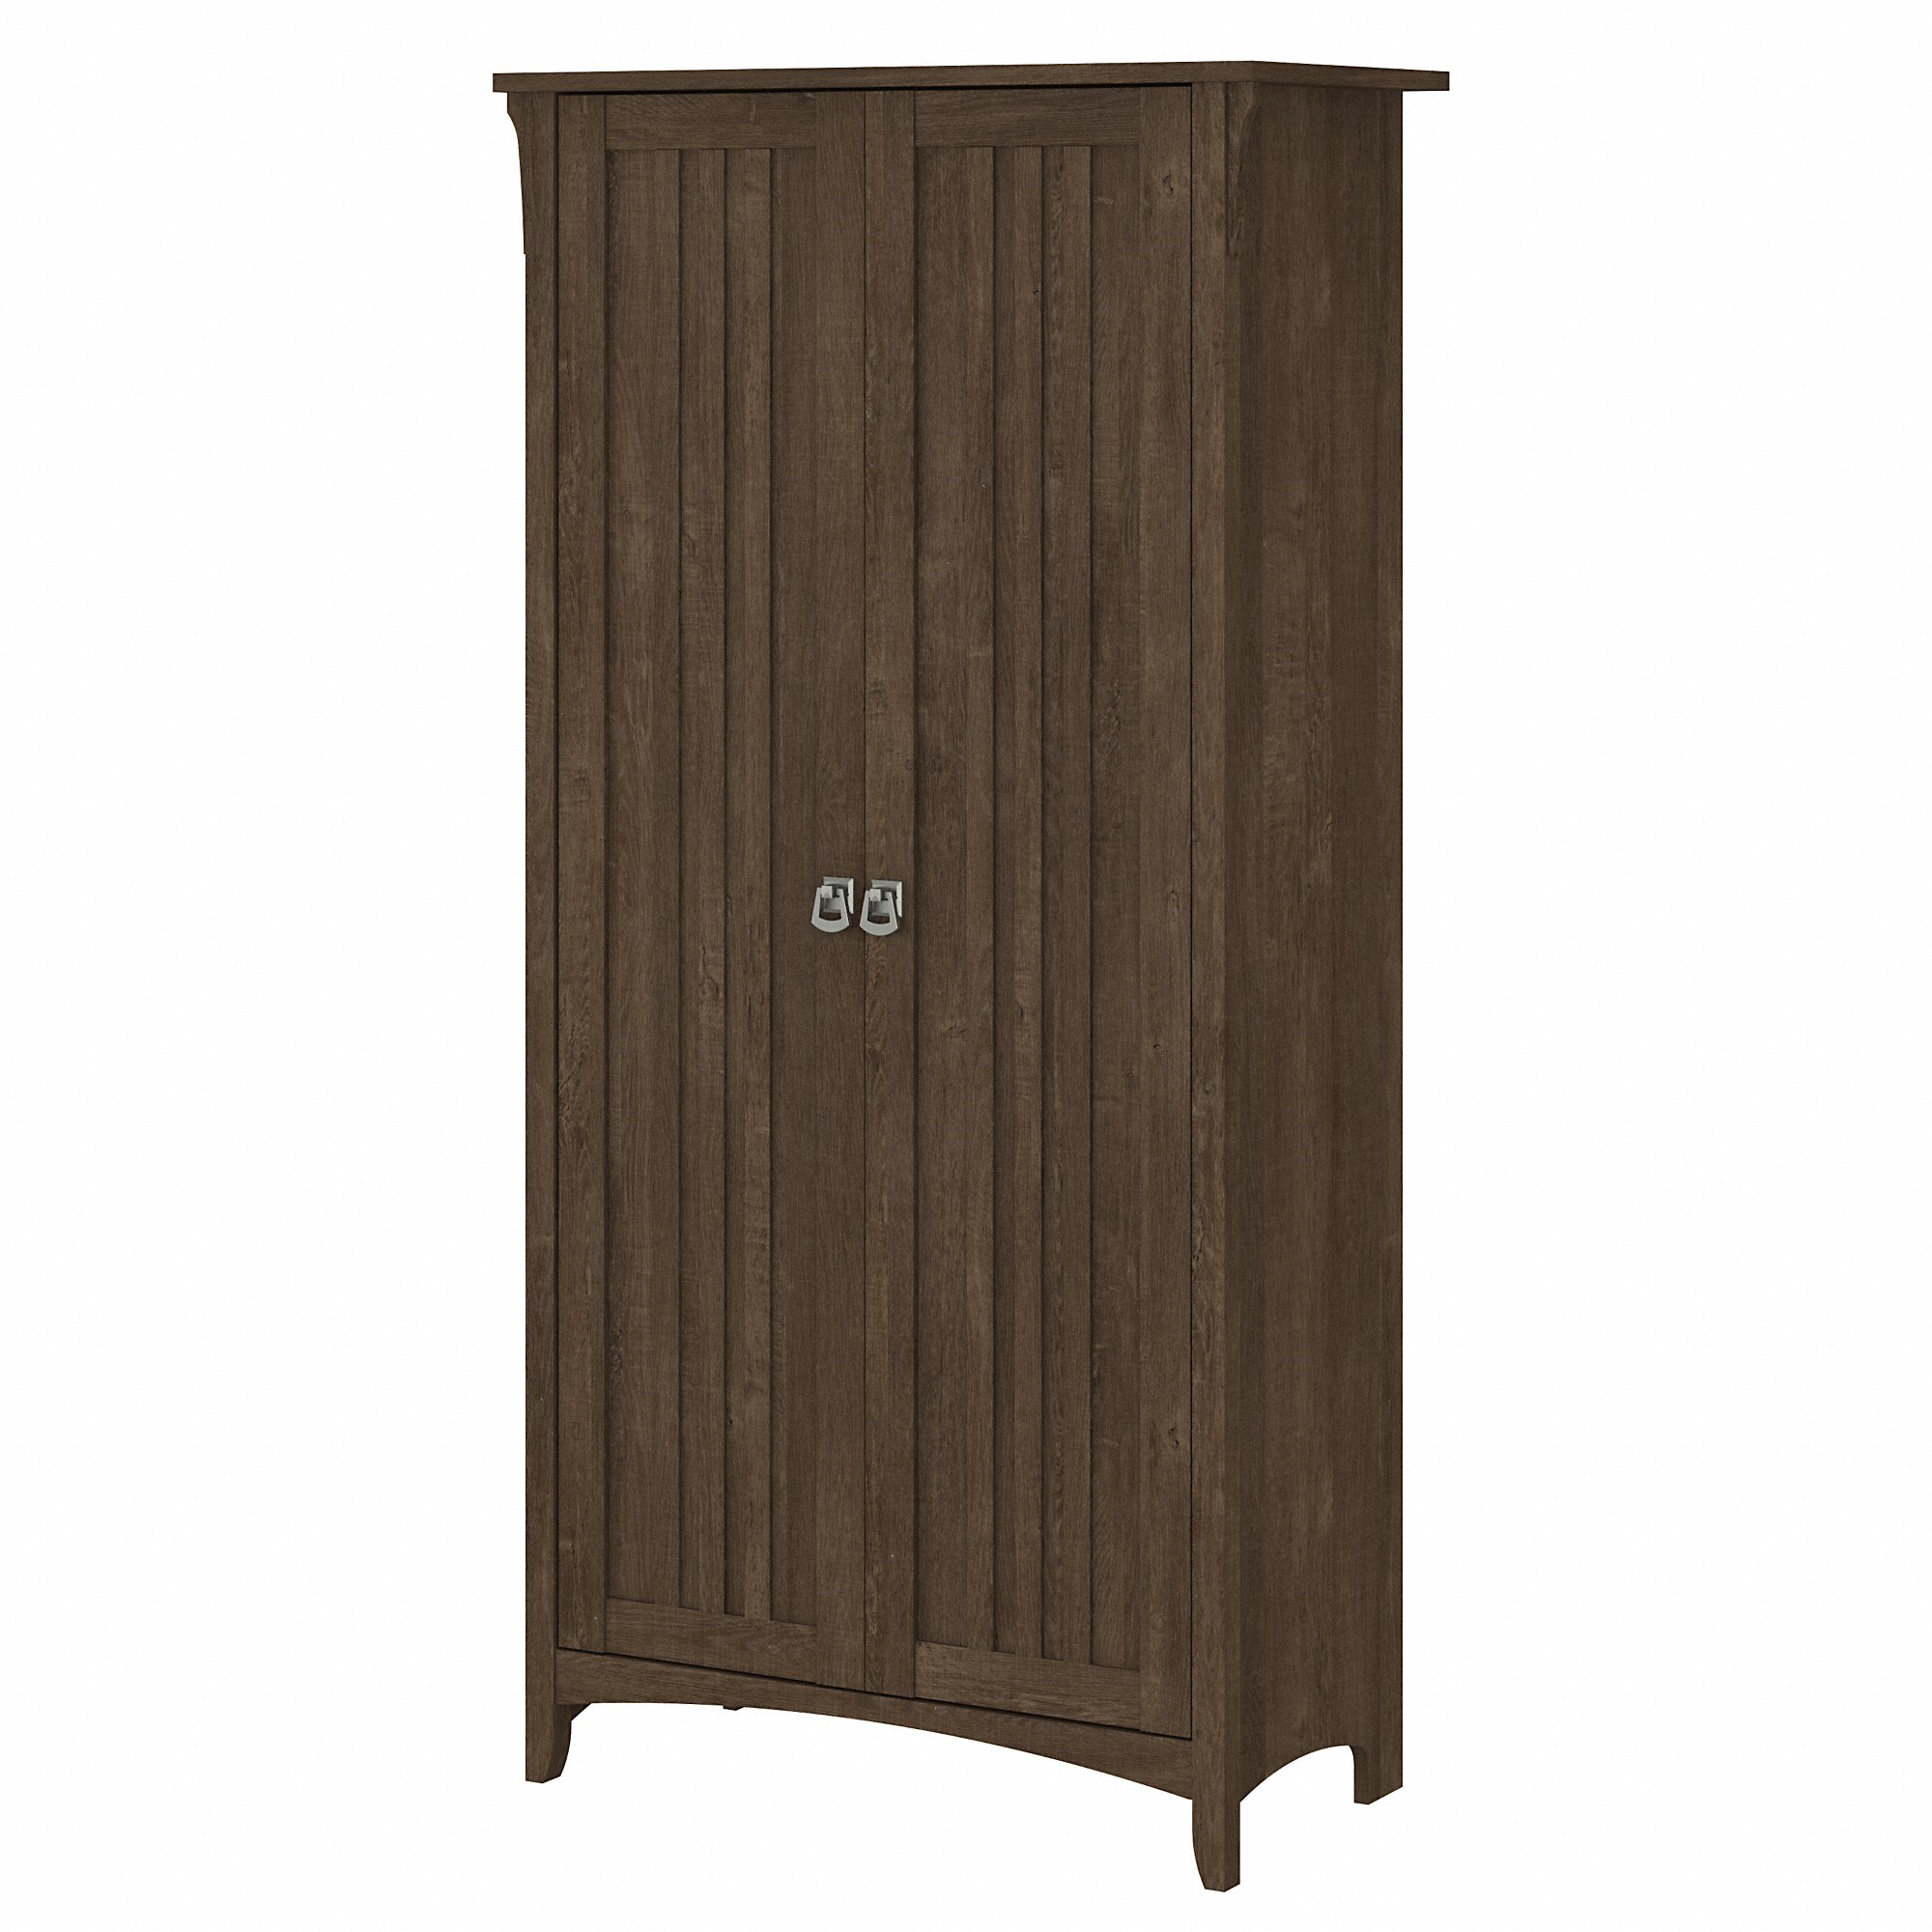 Bush Furniture Salinas Entryway Storage Set with Hall Tree, Shoe Bench and Accent Cabinet Ash Brown